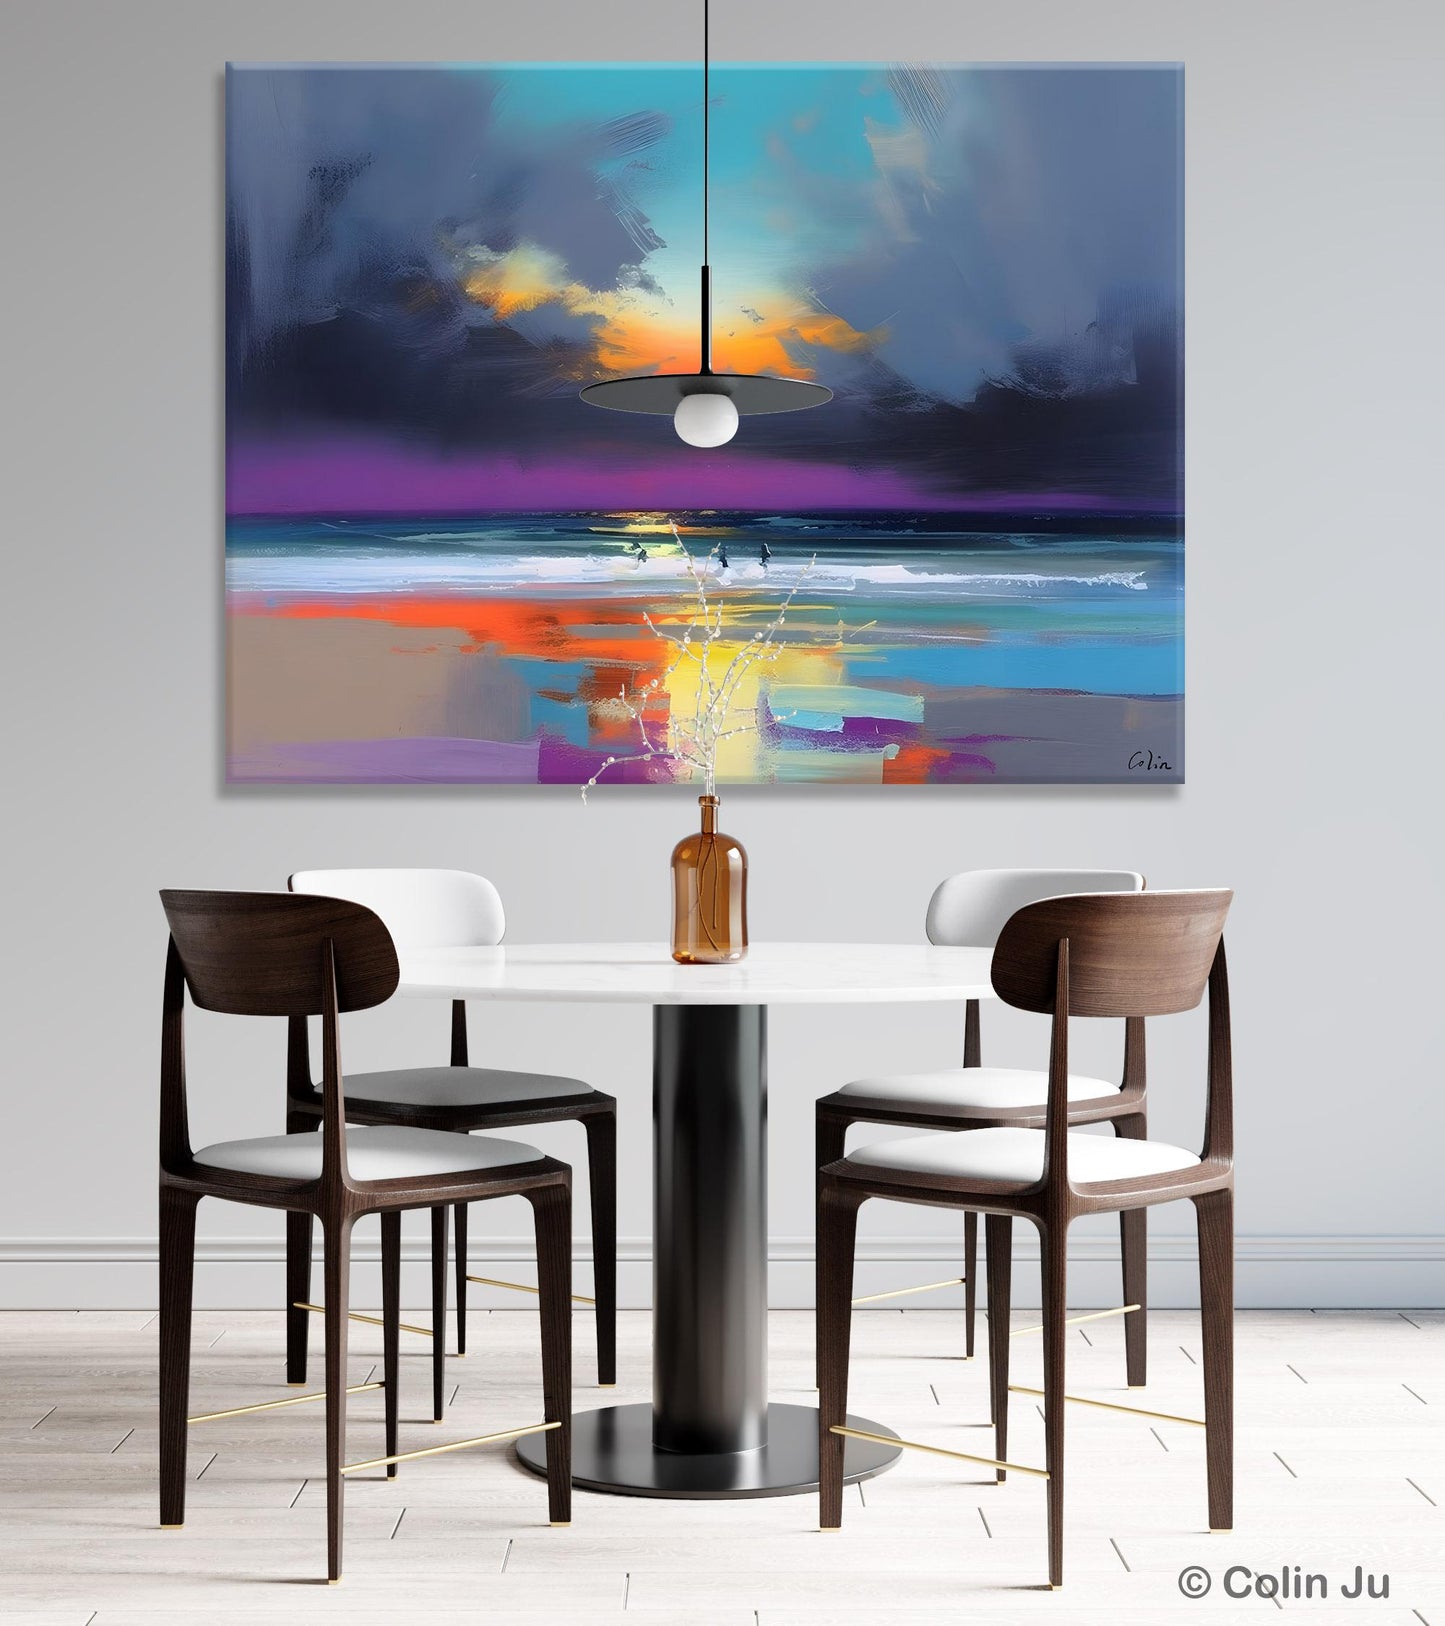 Large Landscape Canvas Paintings, Buy Art Online, Living Room Abstract Paintings, Original Landscape Abstract Painting, Simple Wall Art Ideas